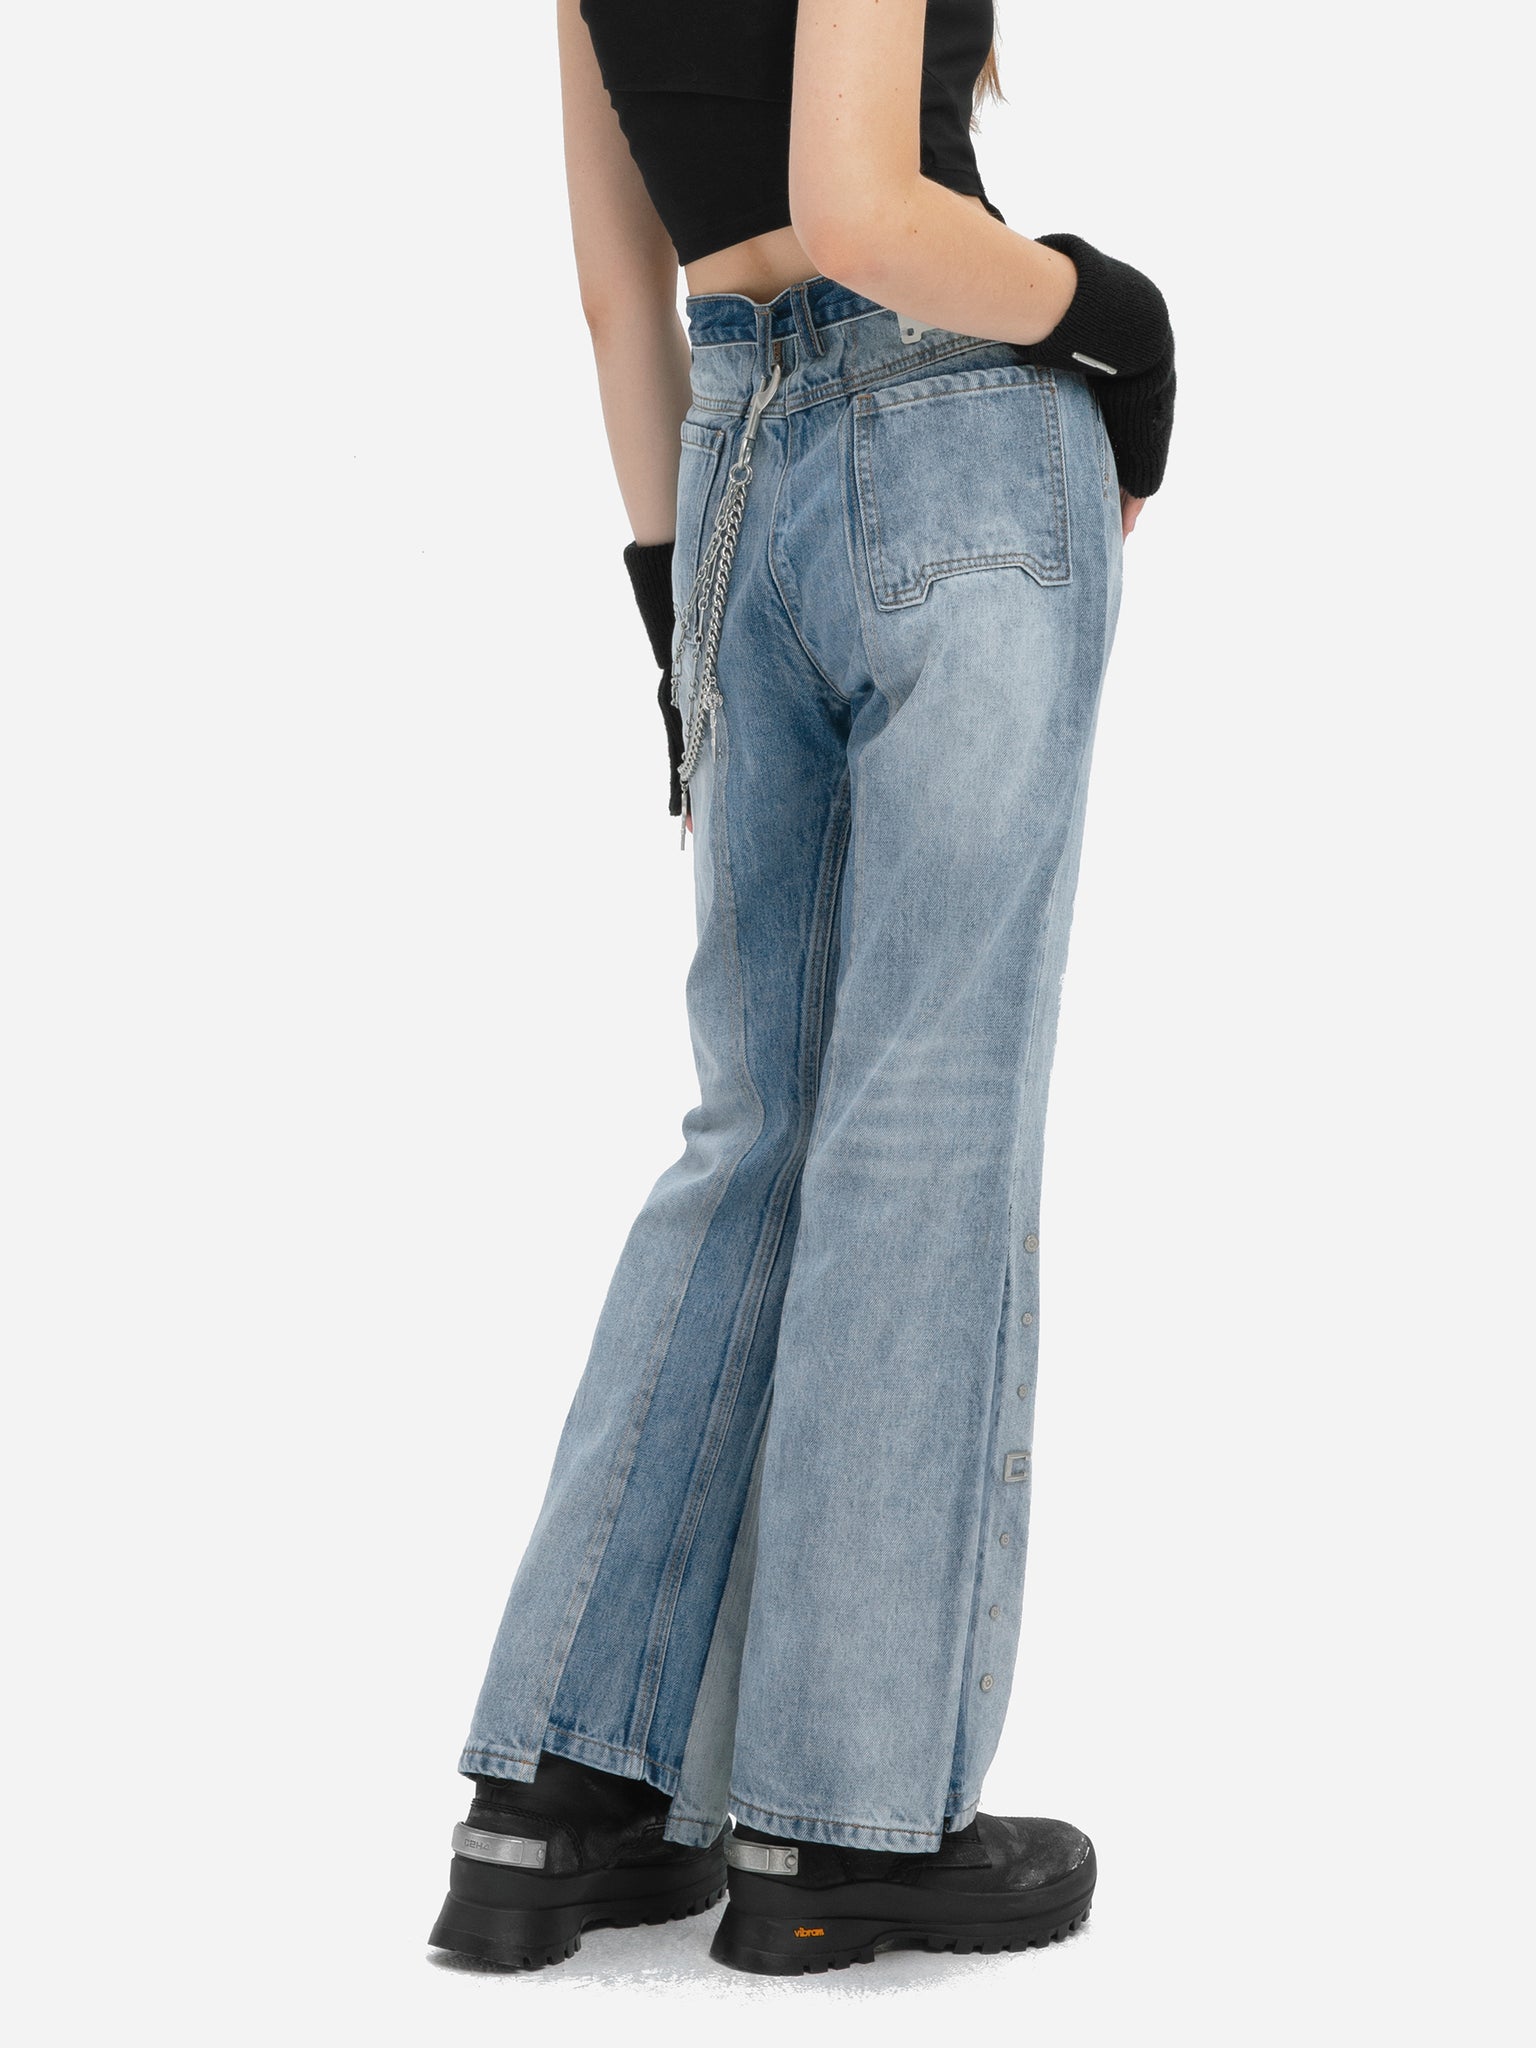 004 - Panelled Faded Vintage Jeans - C2H4®